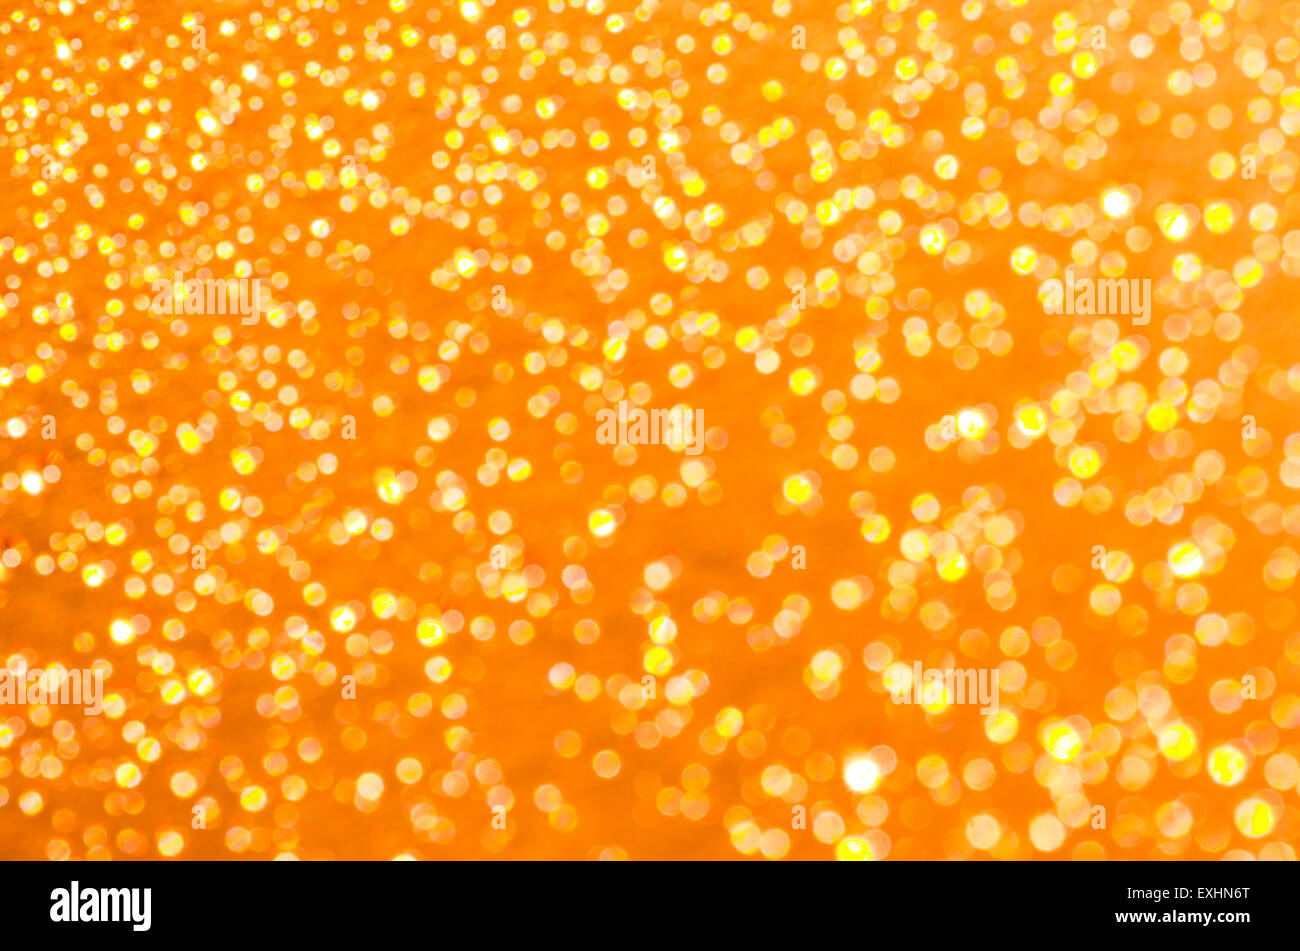 orange abstract blurred bokeh lights background Stock Photo